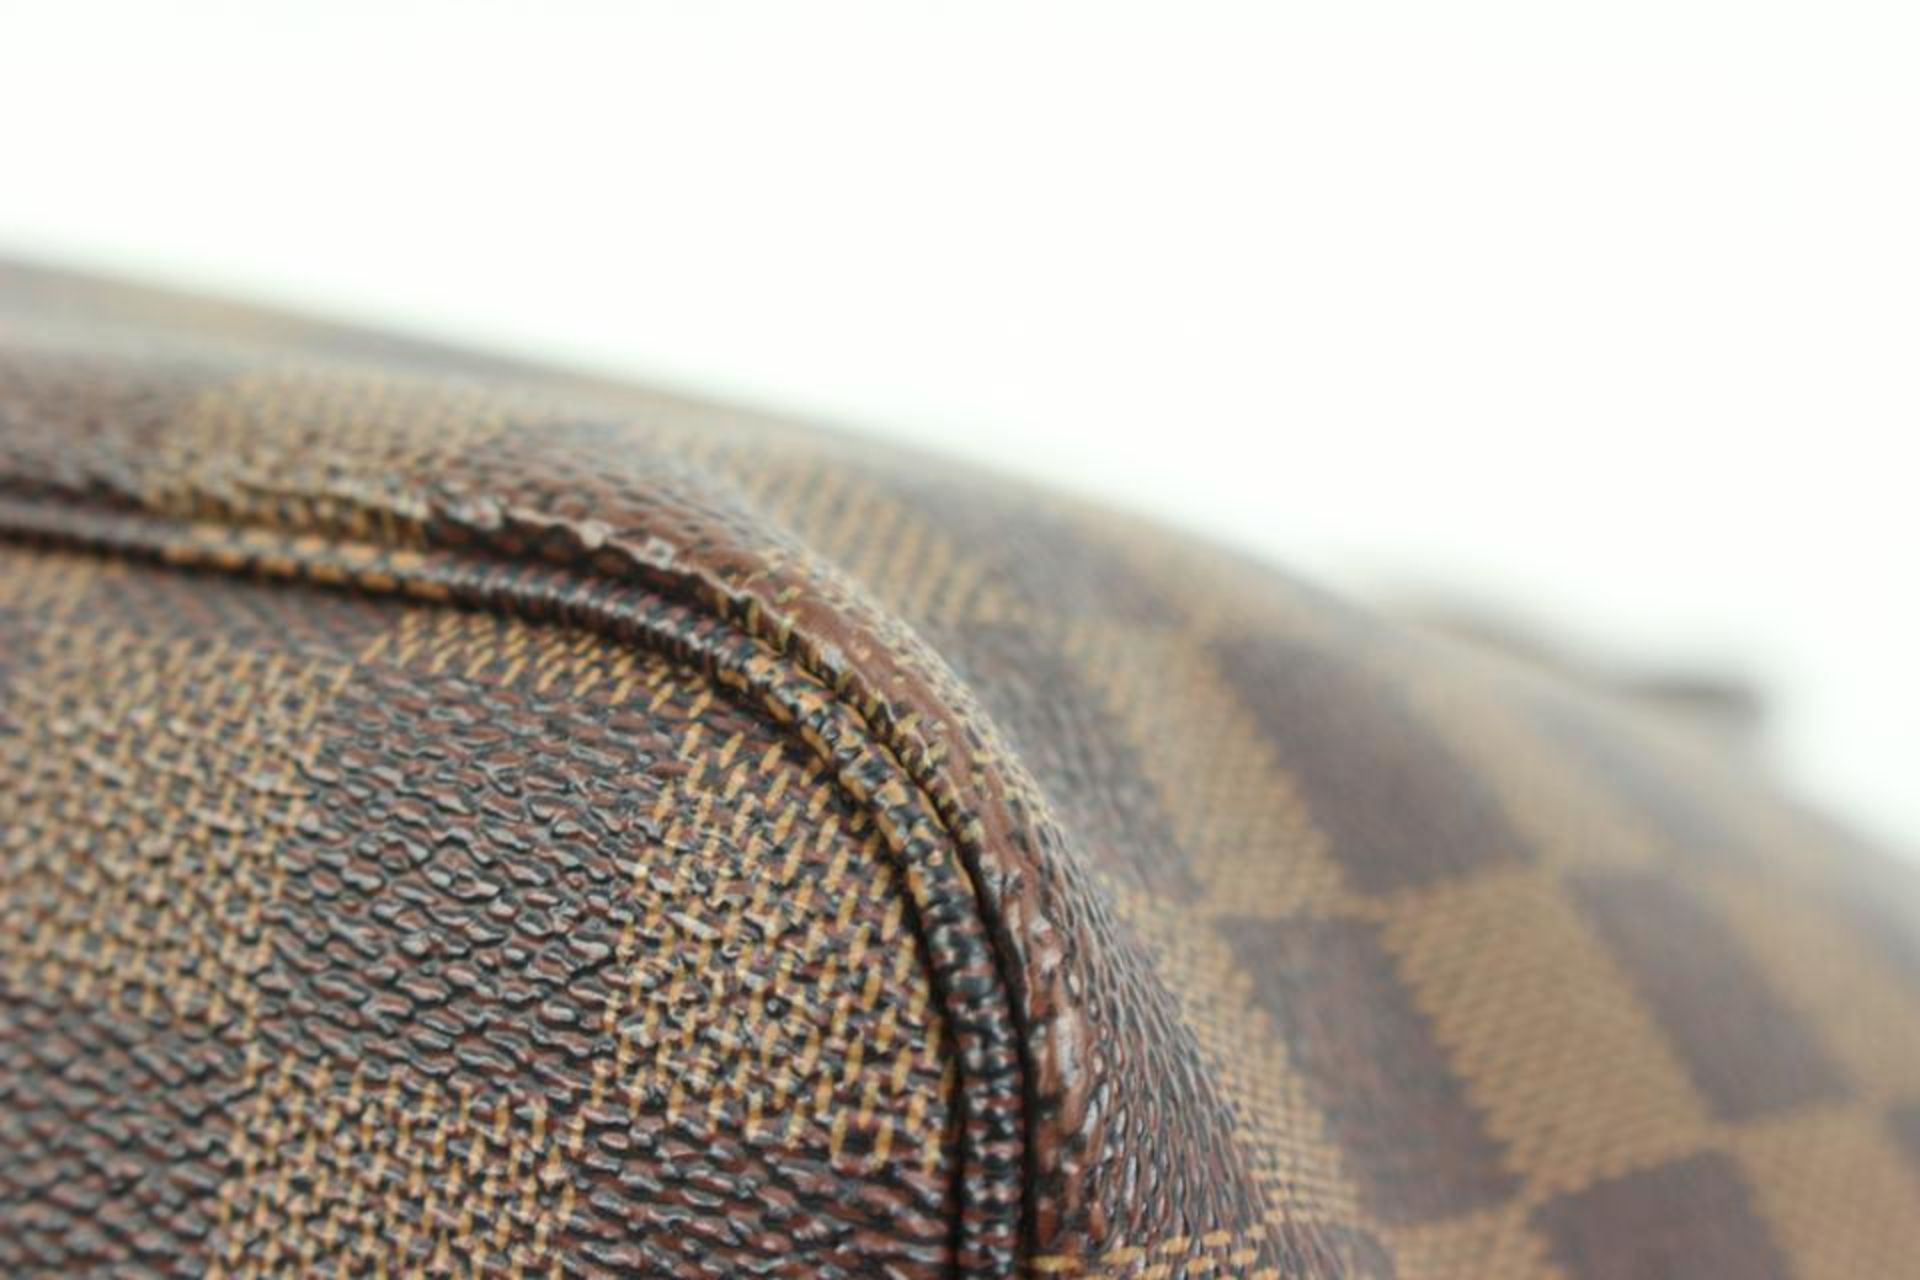 LOUIS VUITTON SMALL DAMIER EBENE NEVERFULL PM TOTE - Image 3 of 12